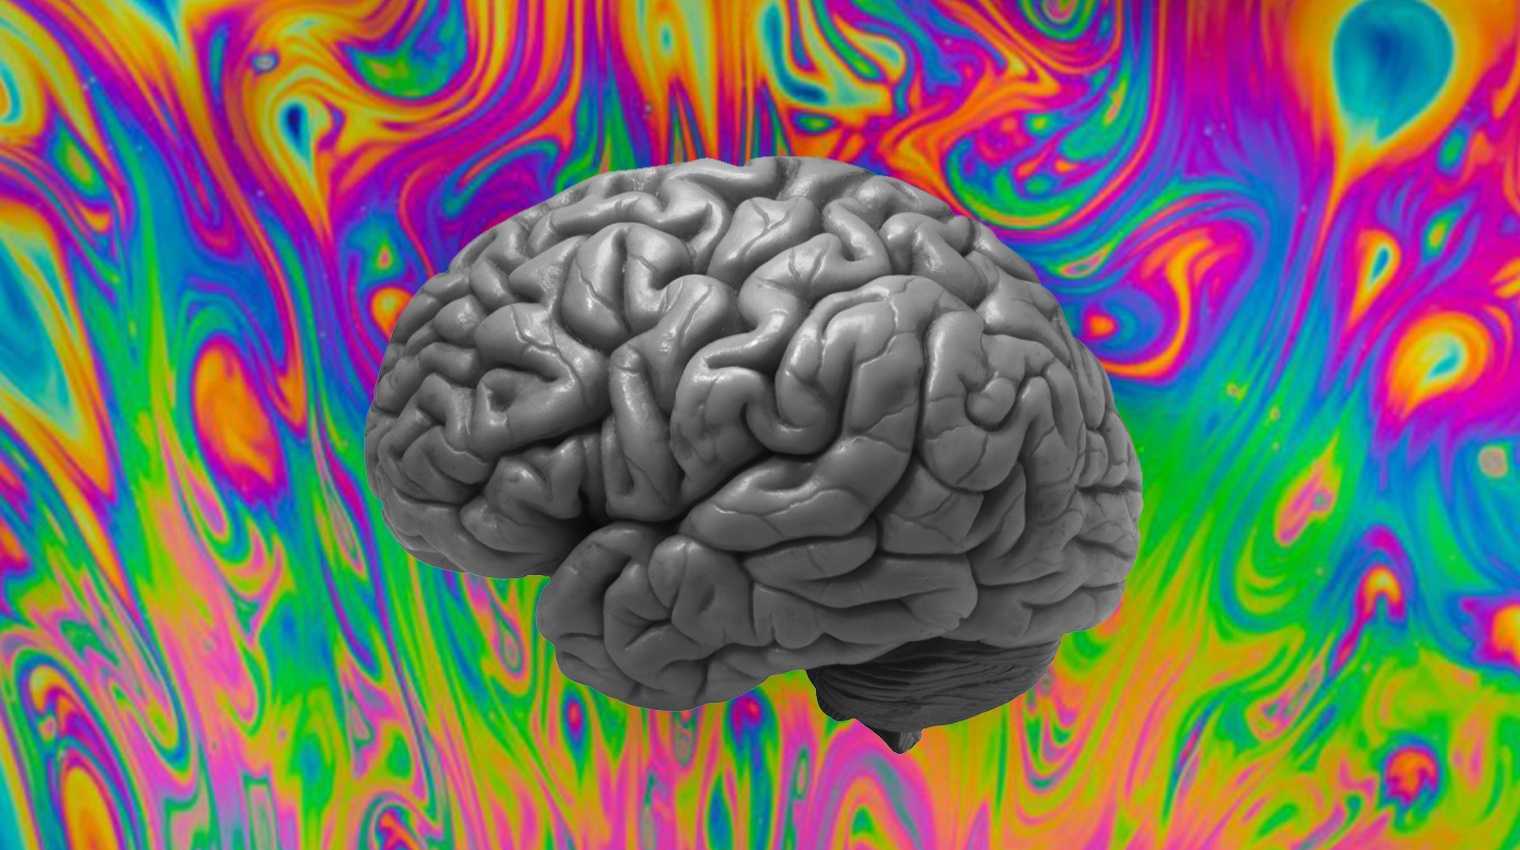 The human brain on a colorful background